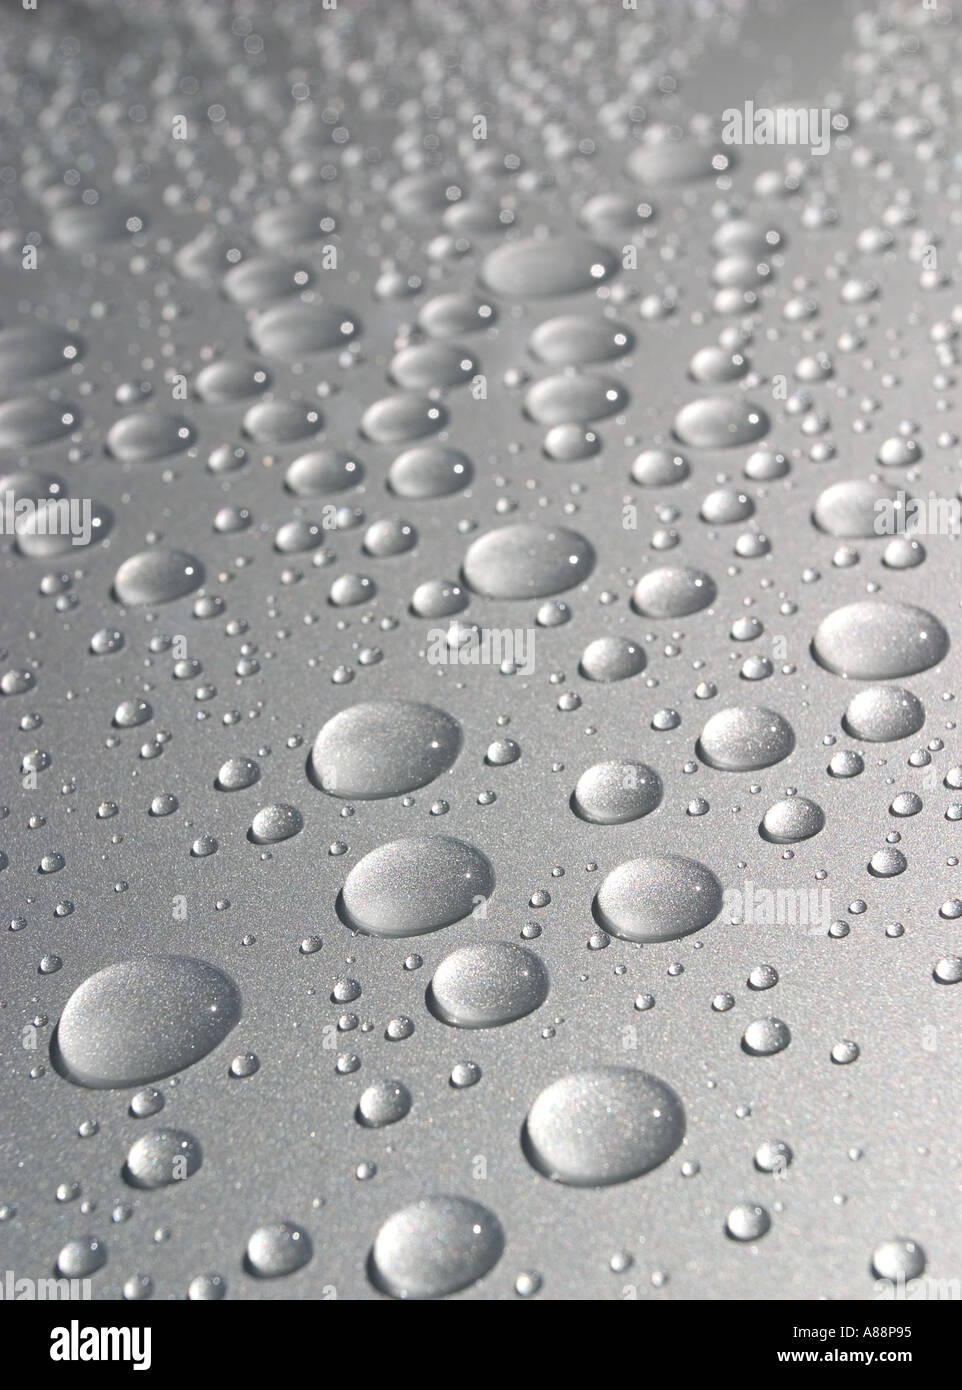 Round water drops on  metal surface Stock Photo